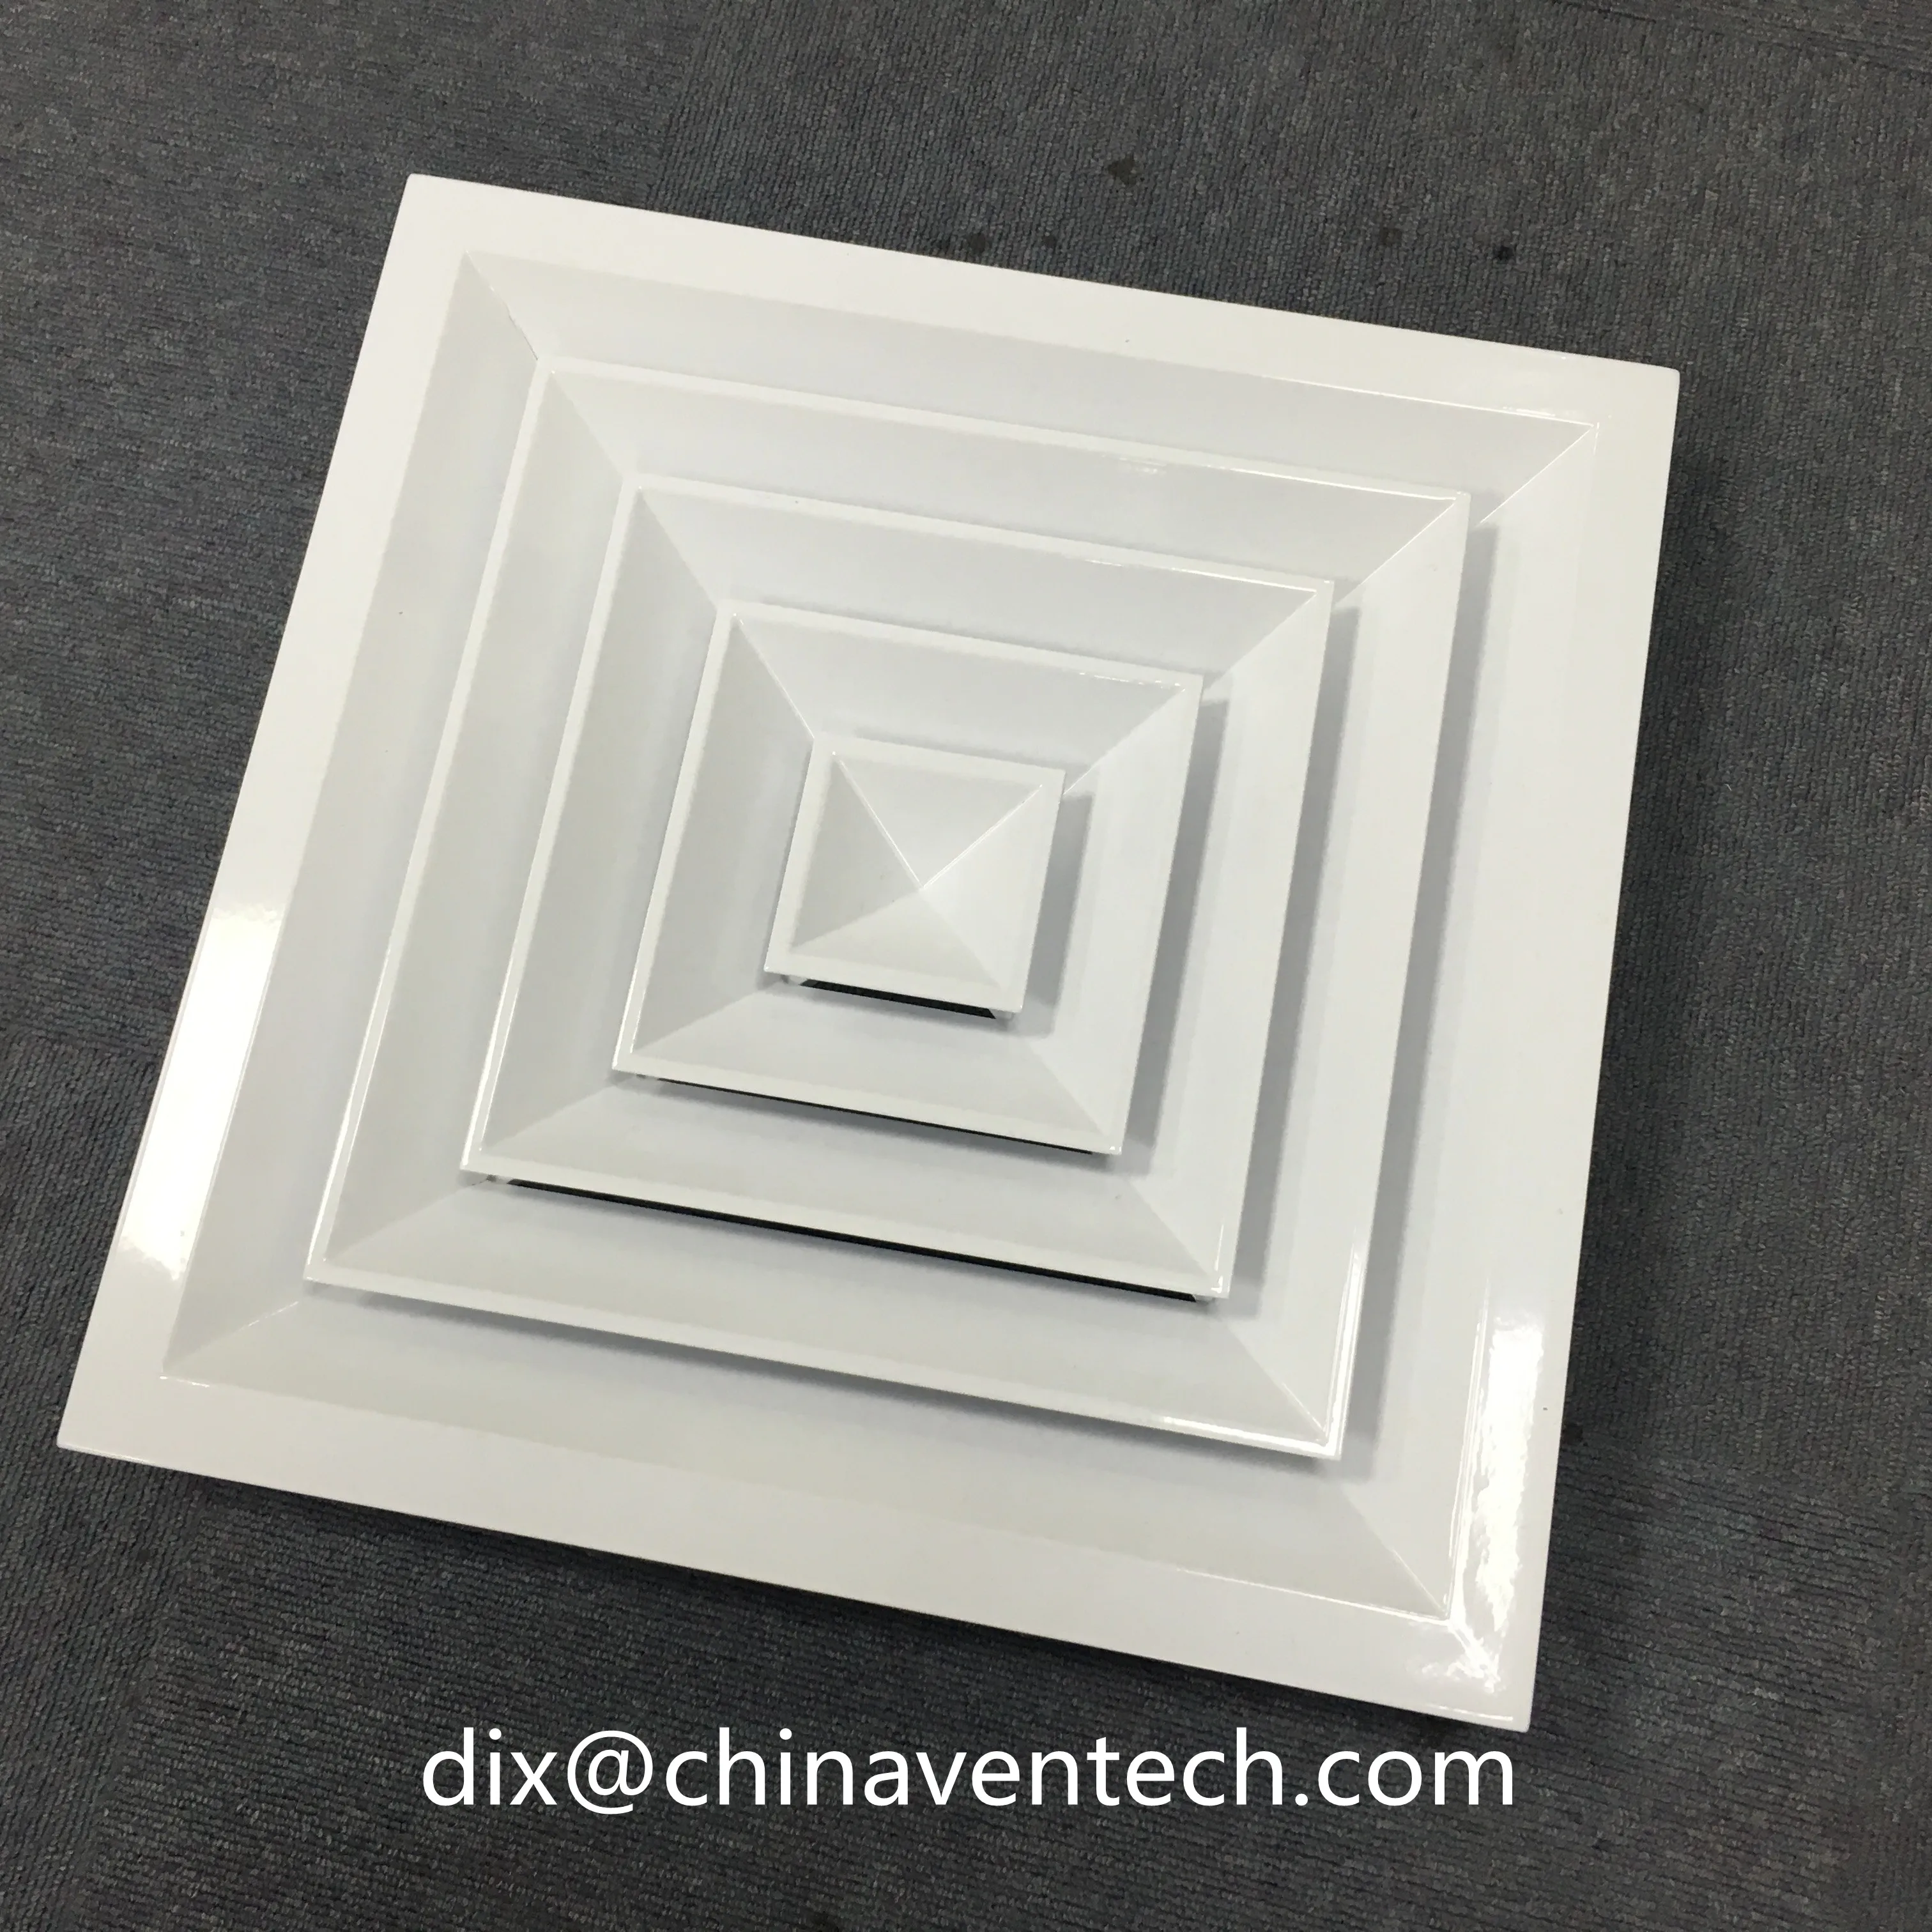 Hvac air diffusion products high quality durable X construction ceiling return air ventilation square 4 way diffuser